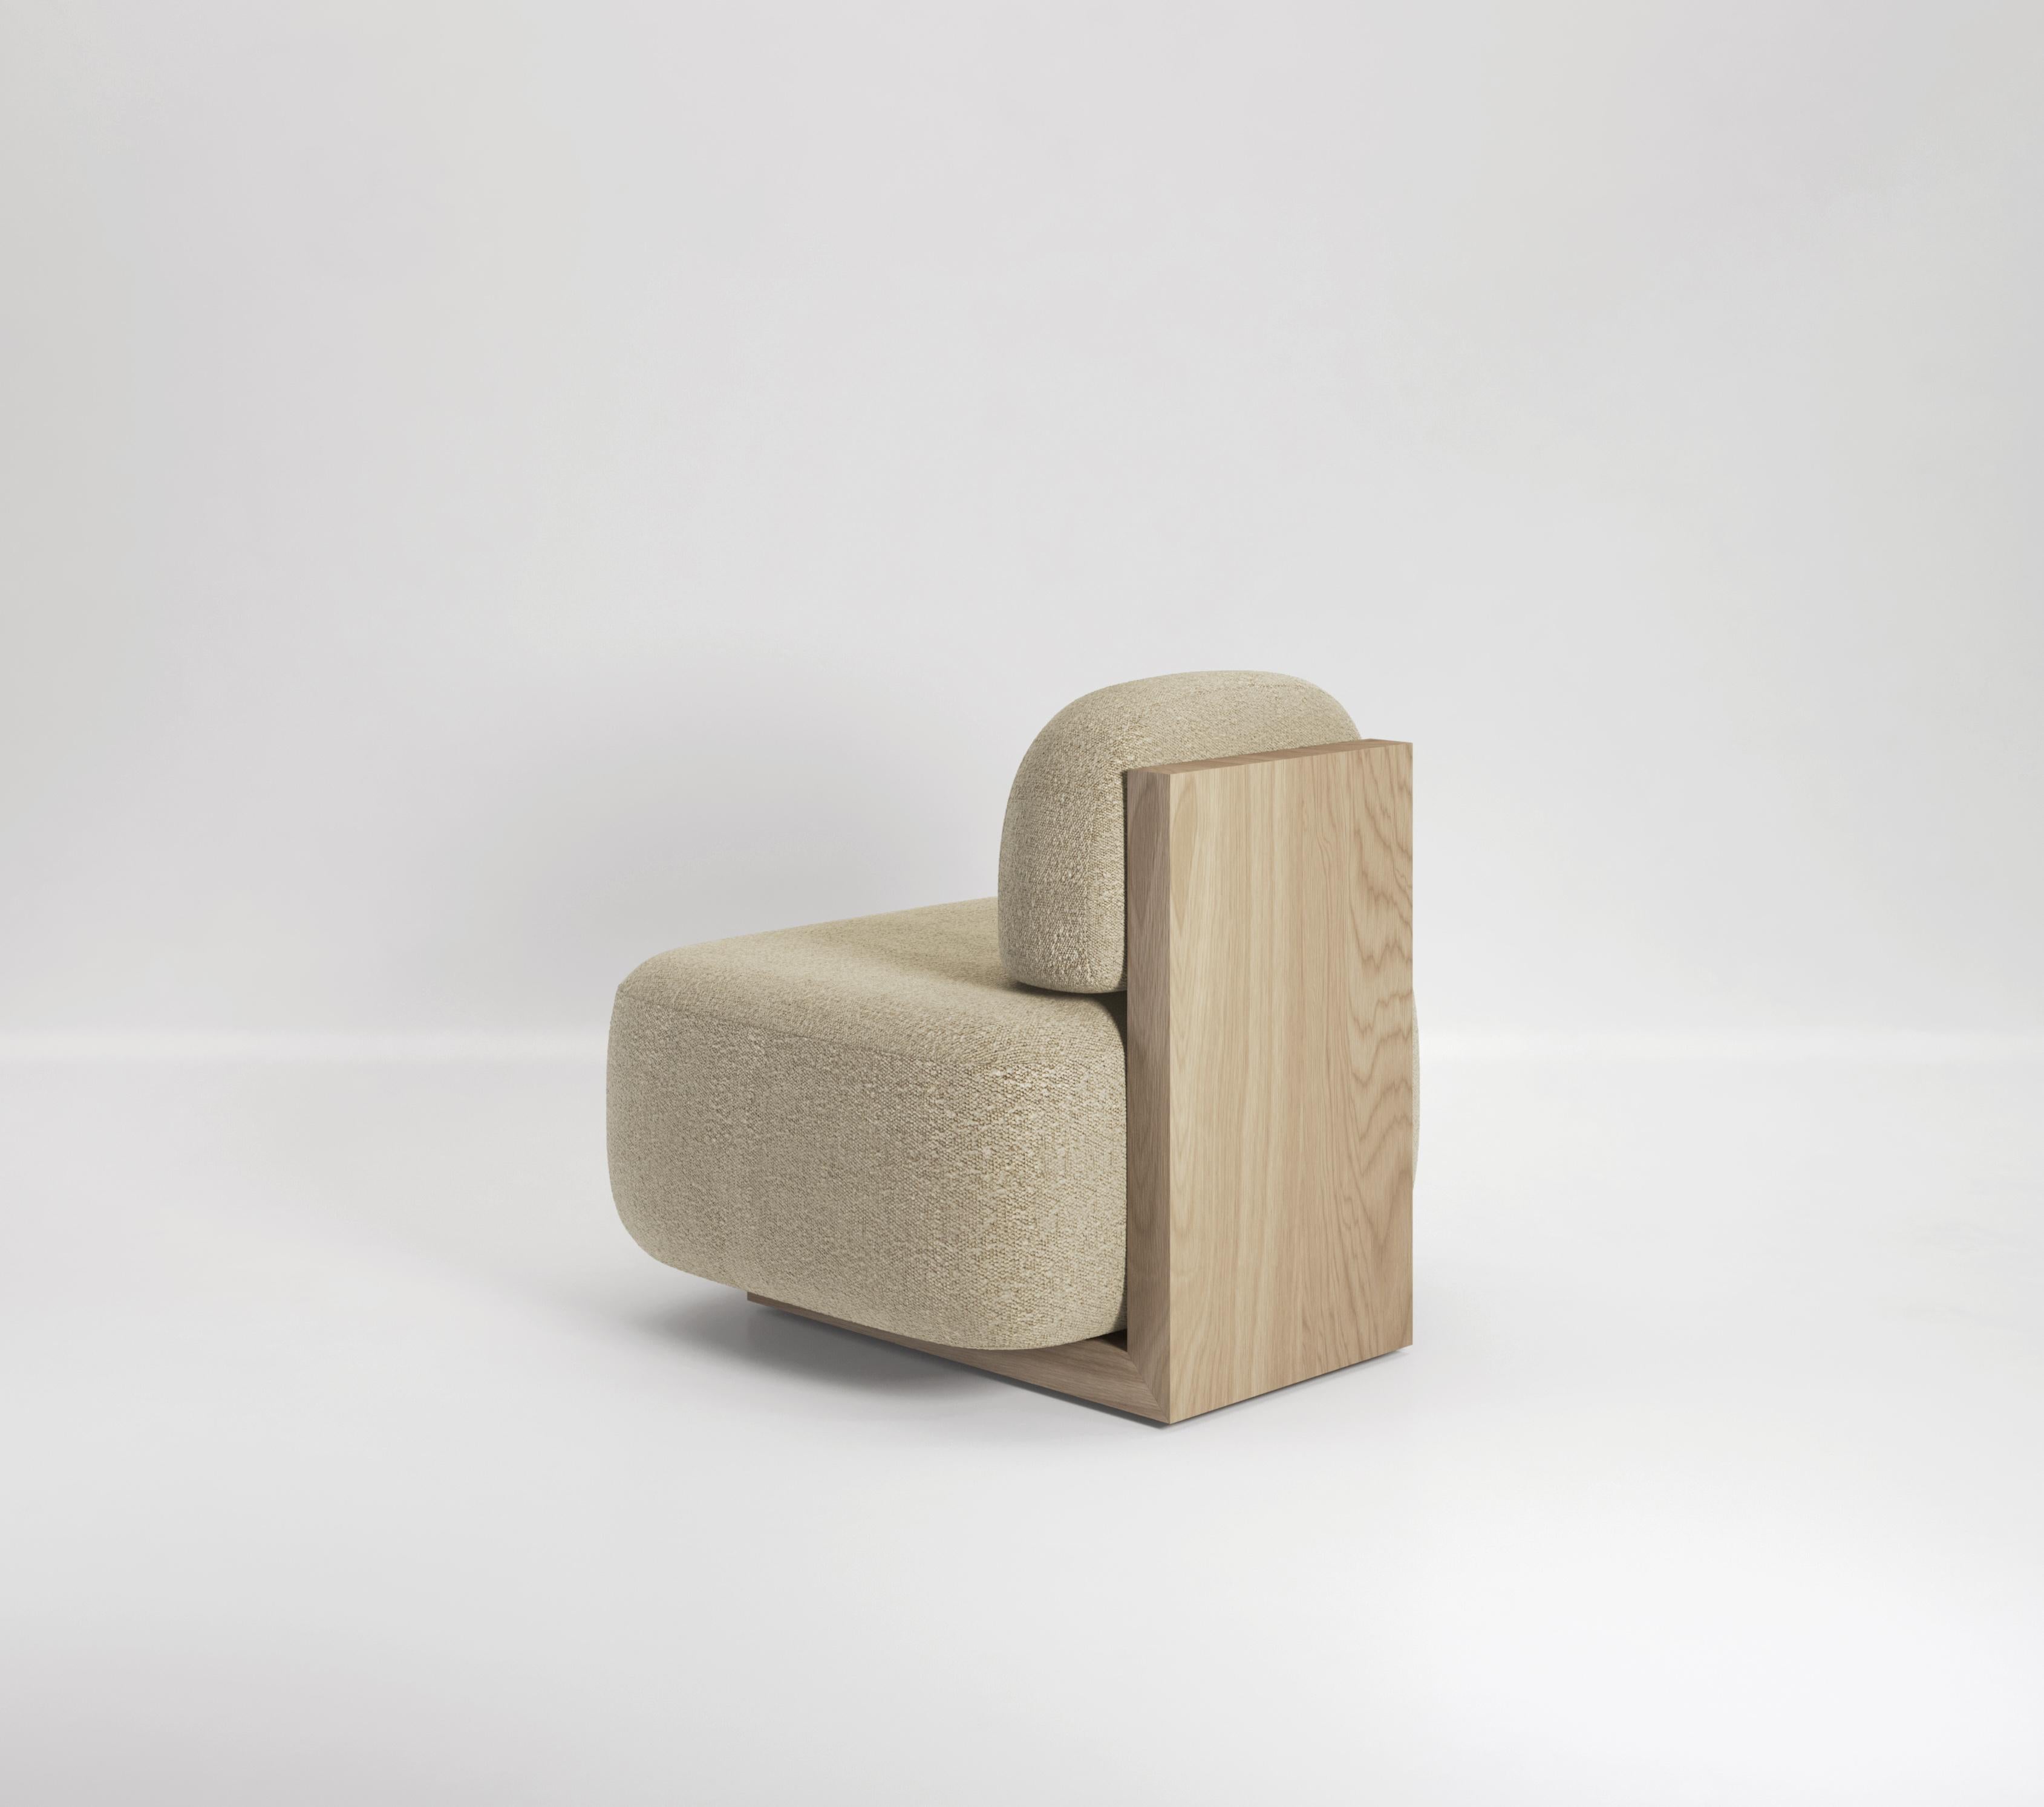 The Yoshida lounge chair is a minimal piece designed to look great from all angles. From the front, two oversized cushions seem to float, unsupported and balancing in place. From behind you see a large solid wood piece which acts as both the base